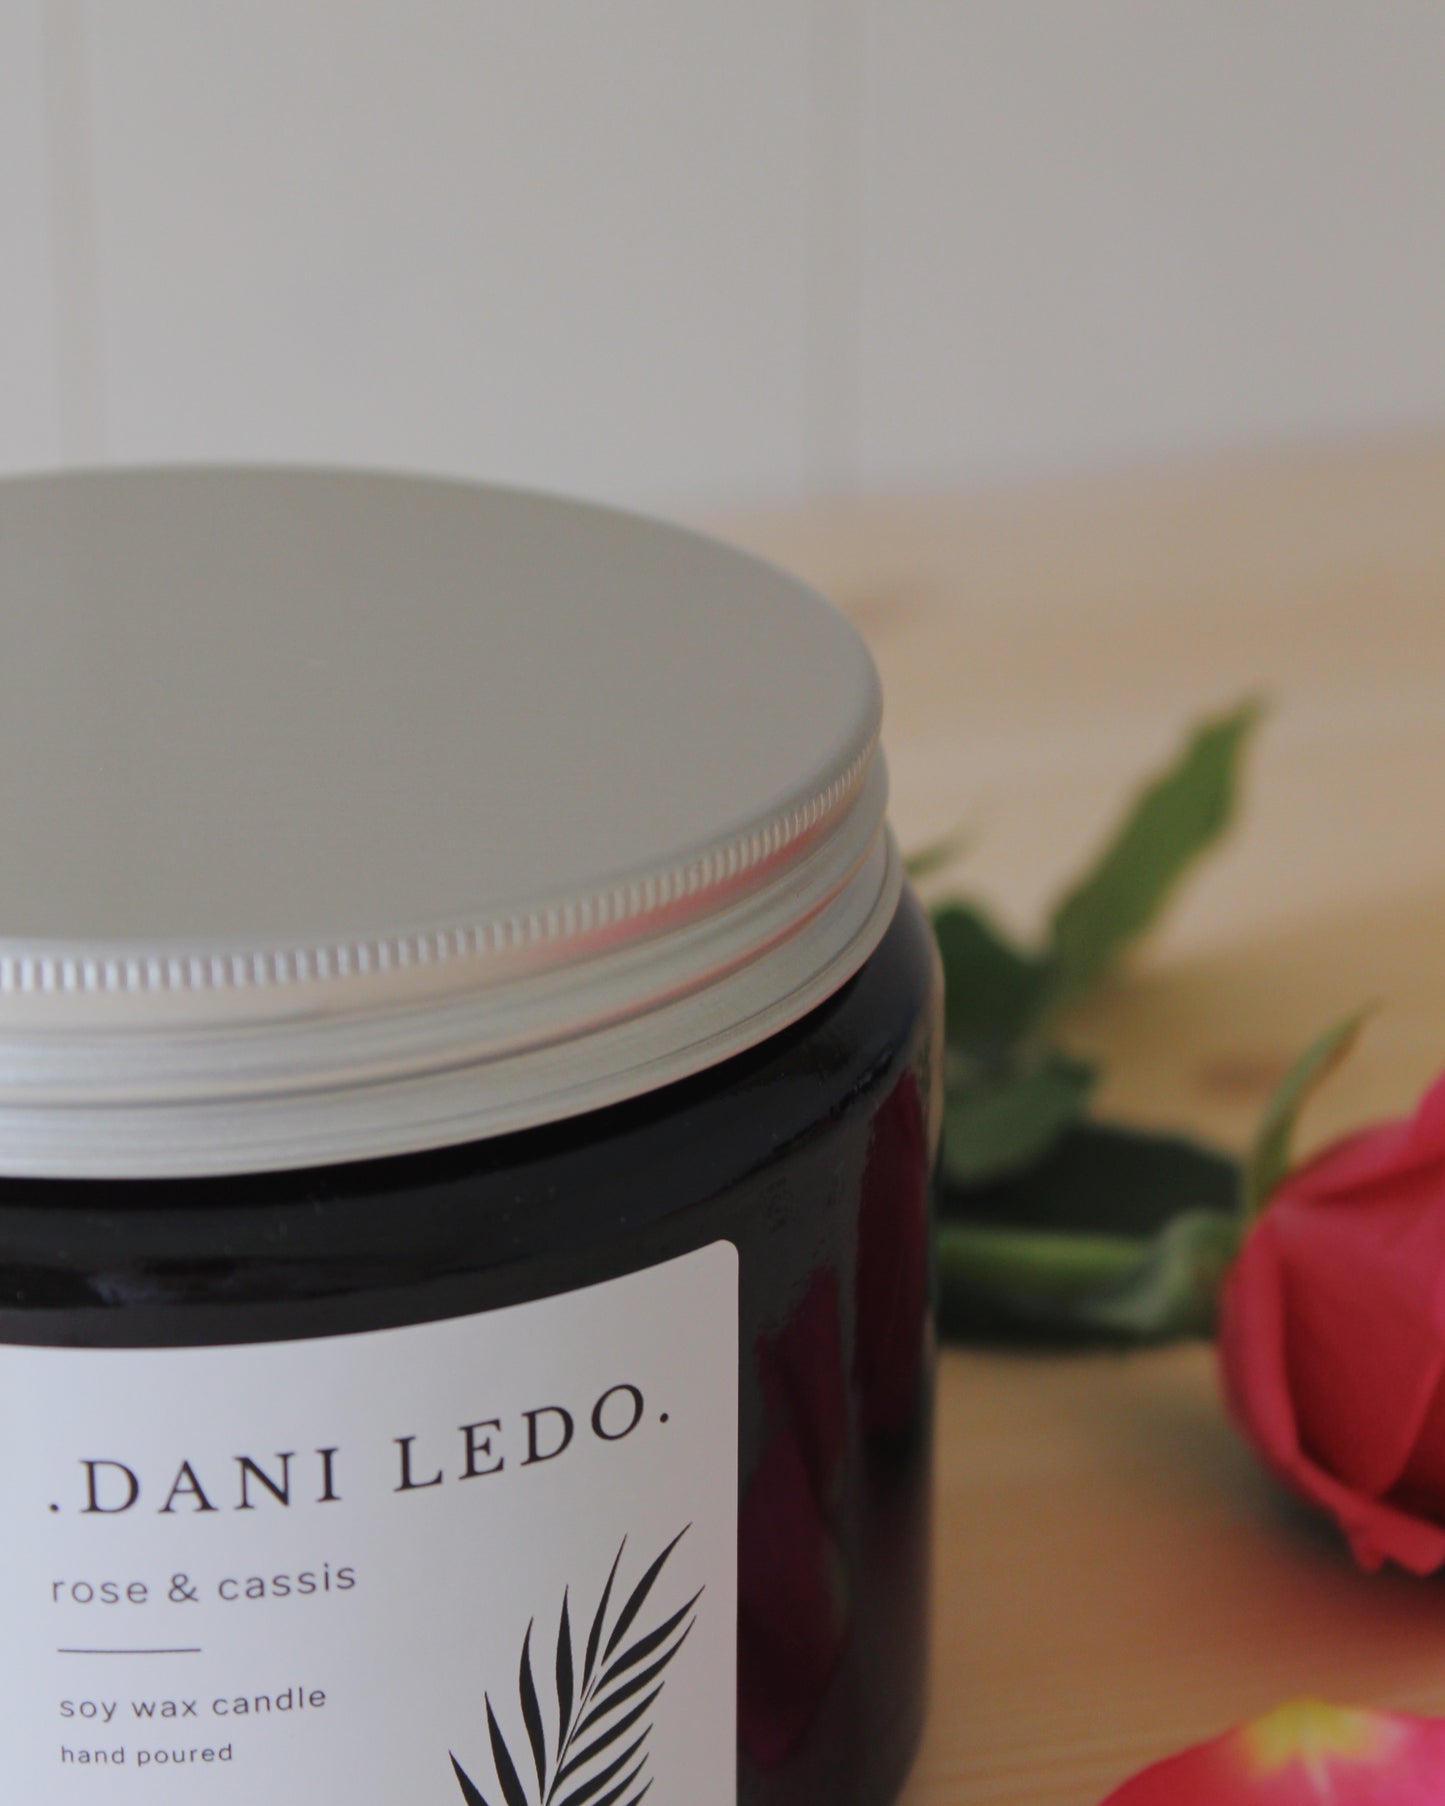 Rose & Cassis Double Wick Candle